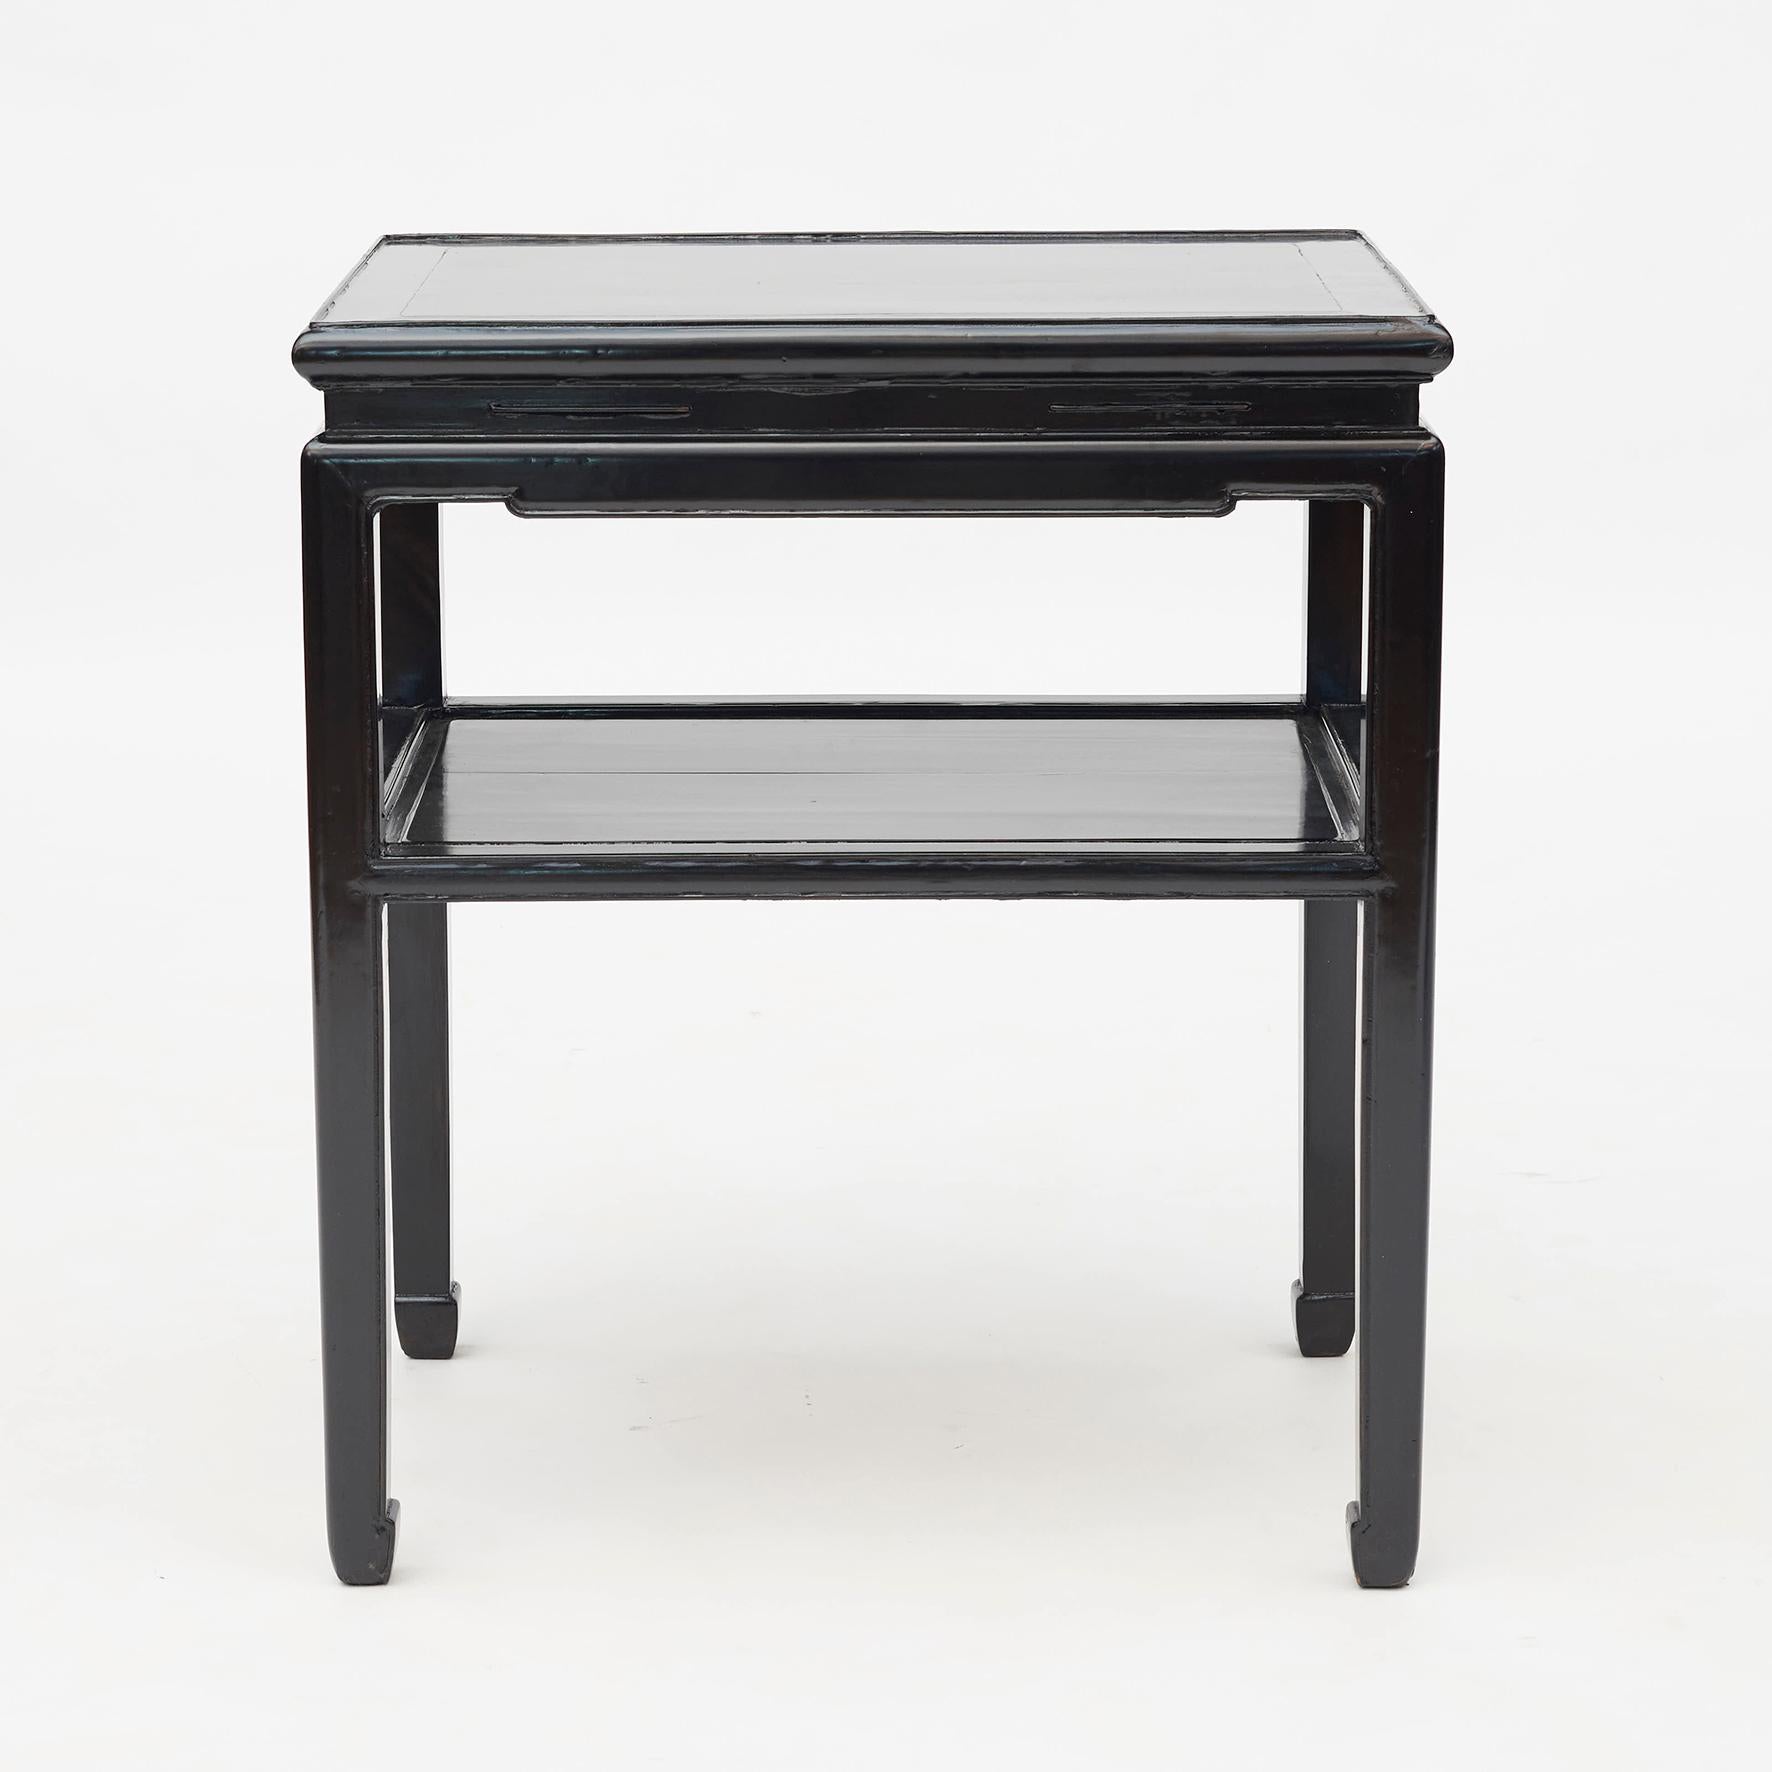 A beautiful Chinese walnut with black lacquer side table from the early-20th century. Four square legs, united by an under tier shelf. Elegant finish on top and shelf Shanghai, China, circa 1920.
      